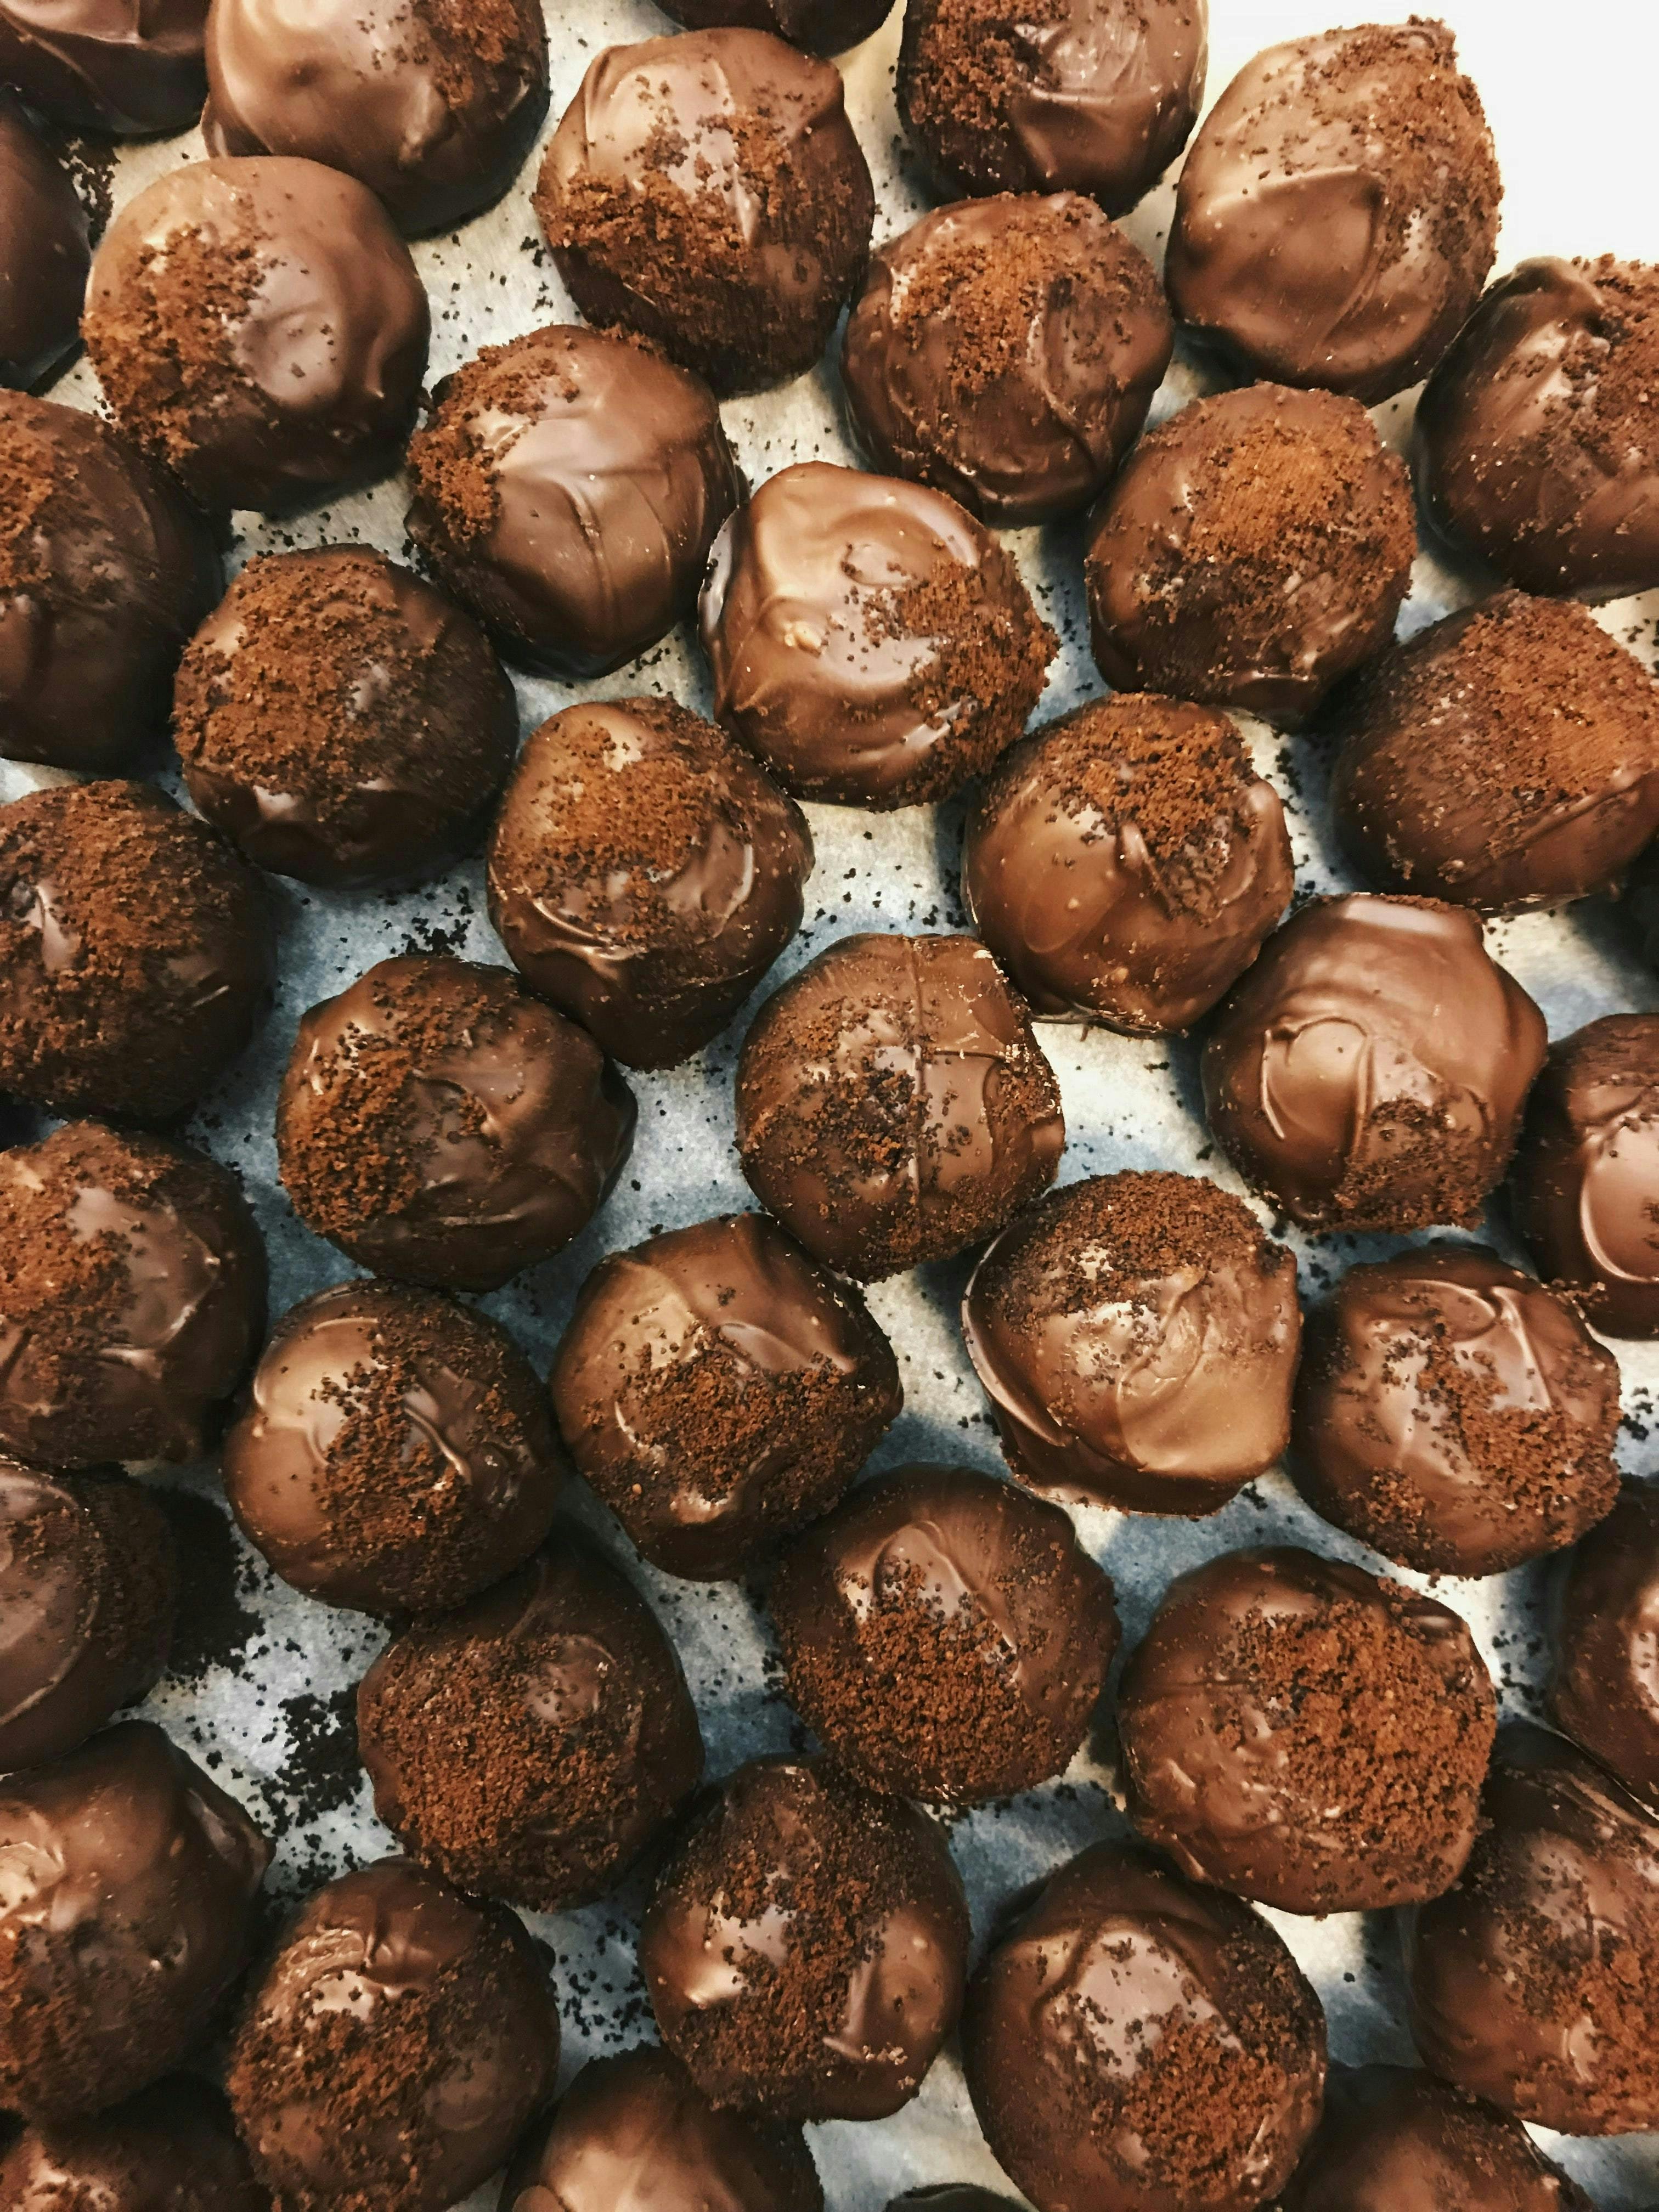 Chocolate Peanut Butter Balls cover image